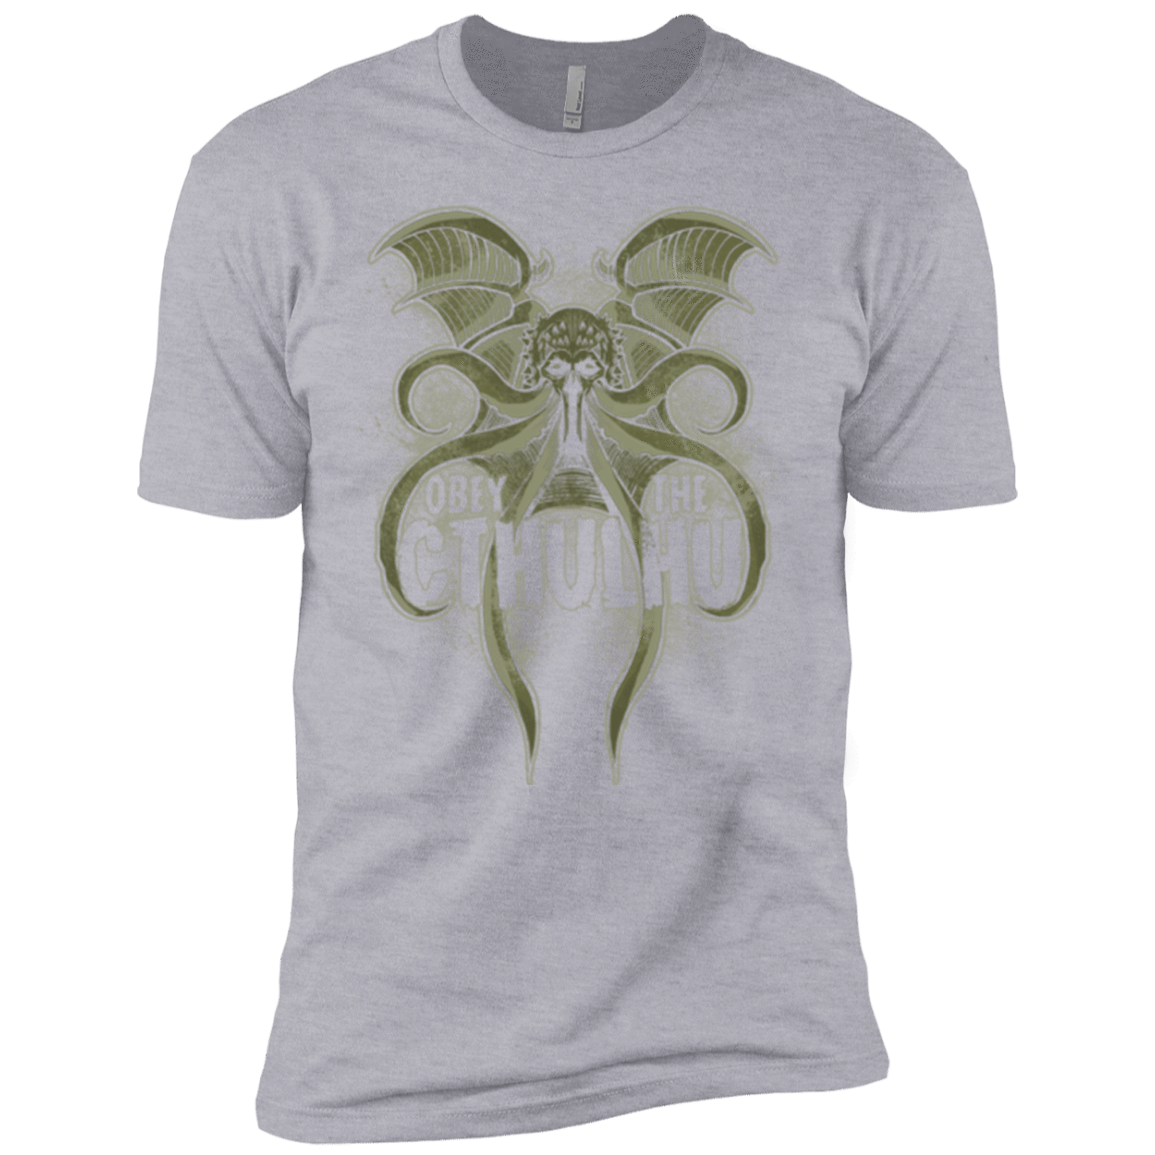 T-Shirts Heather Grey / X-Small Obey the Cthulhu Men's Premium T-Shirt